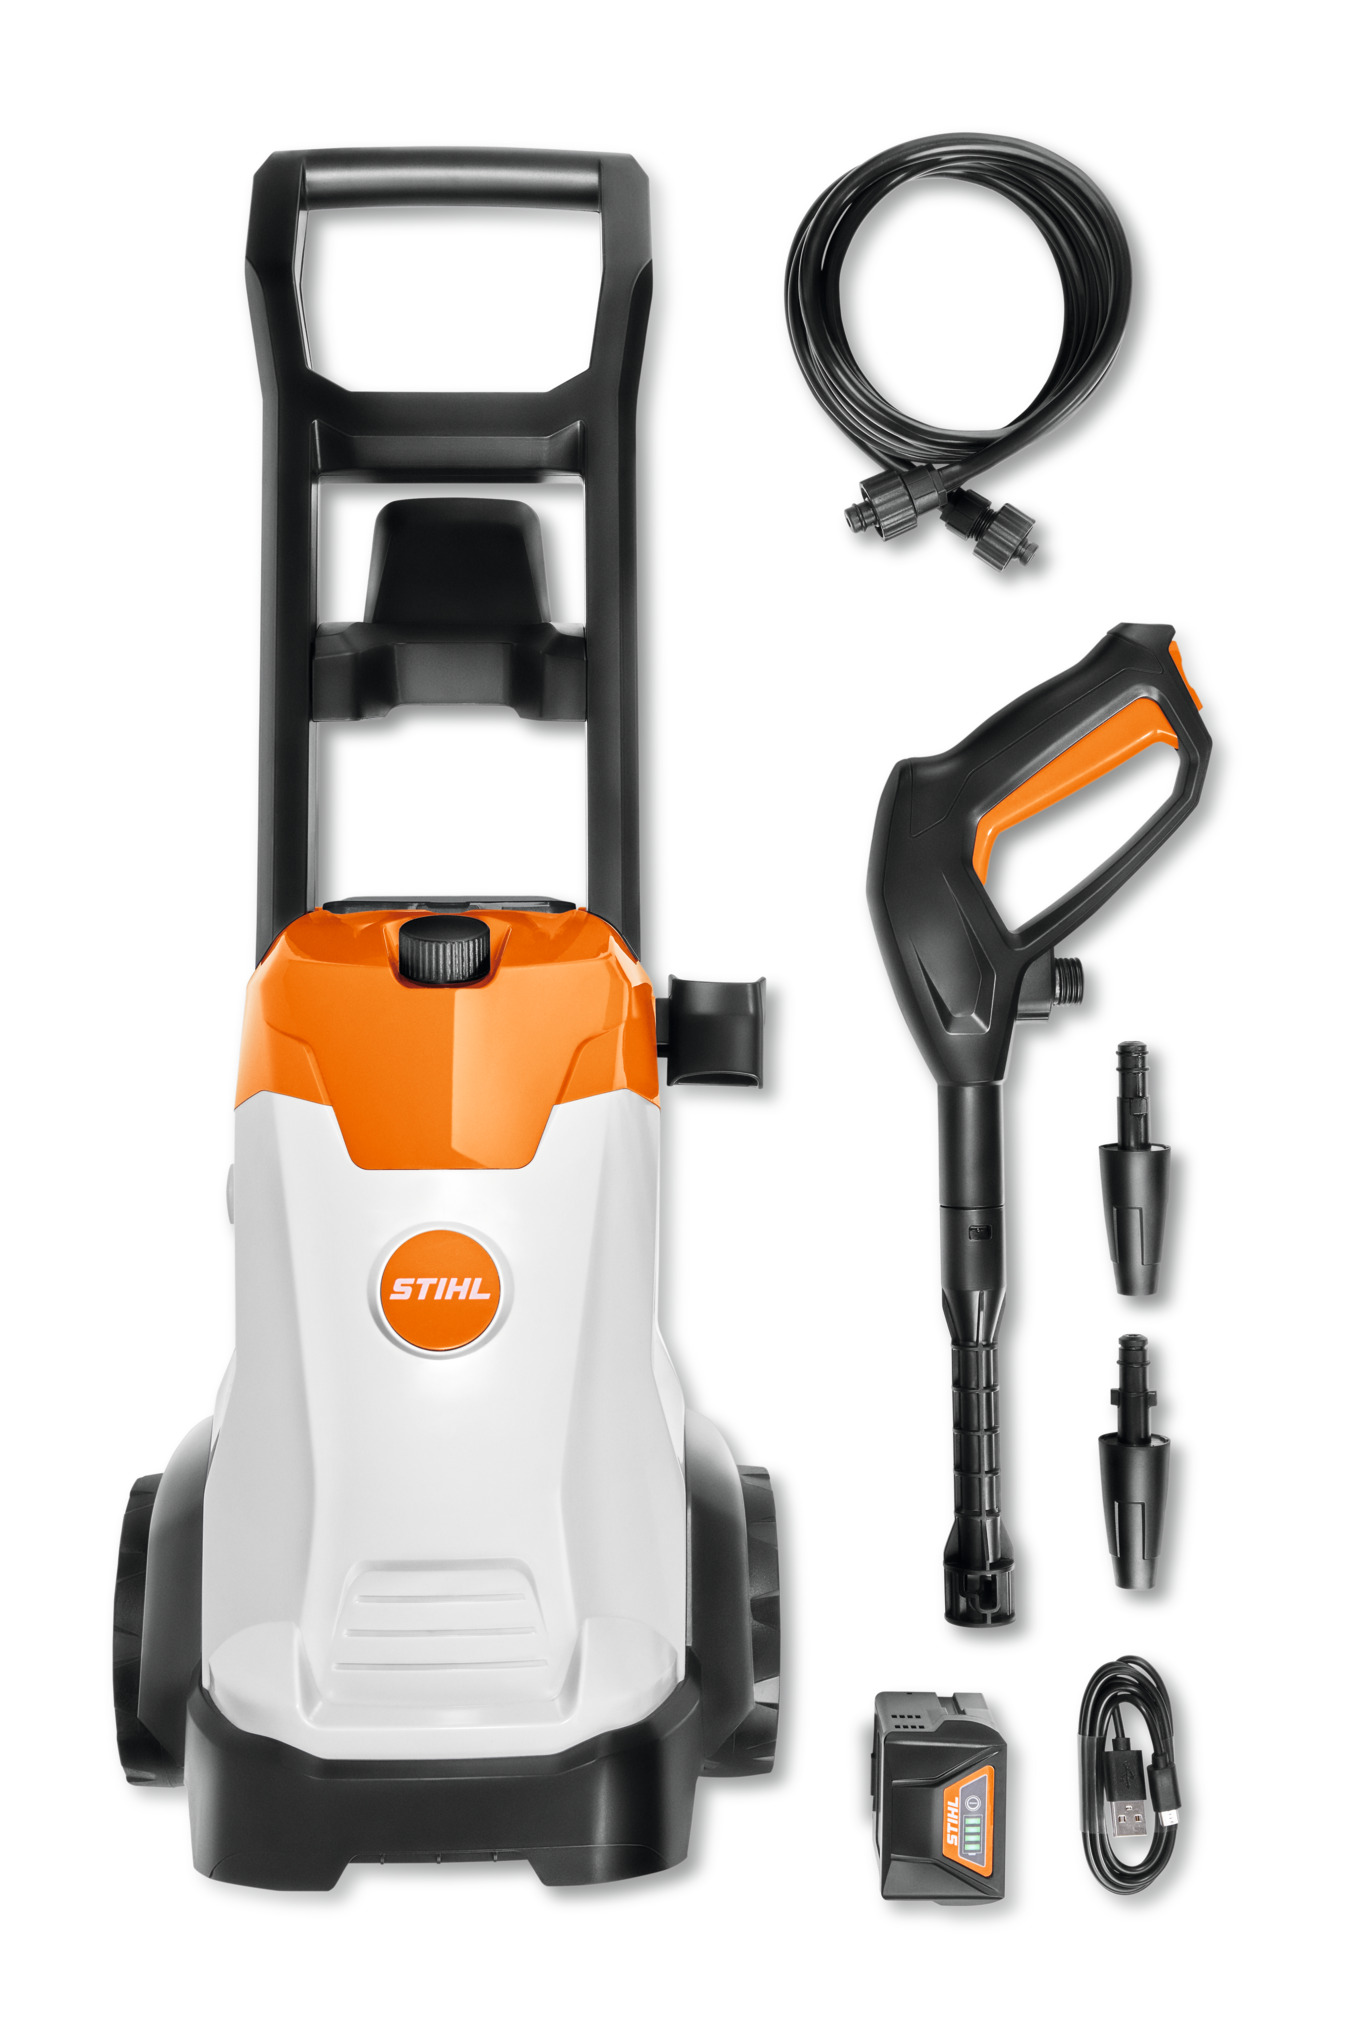 Children's battery-operated pressure washer